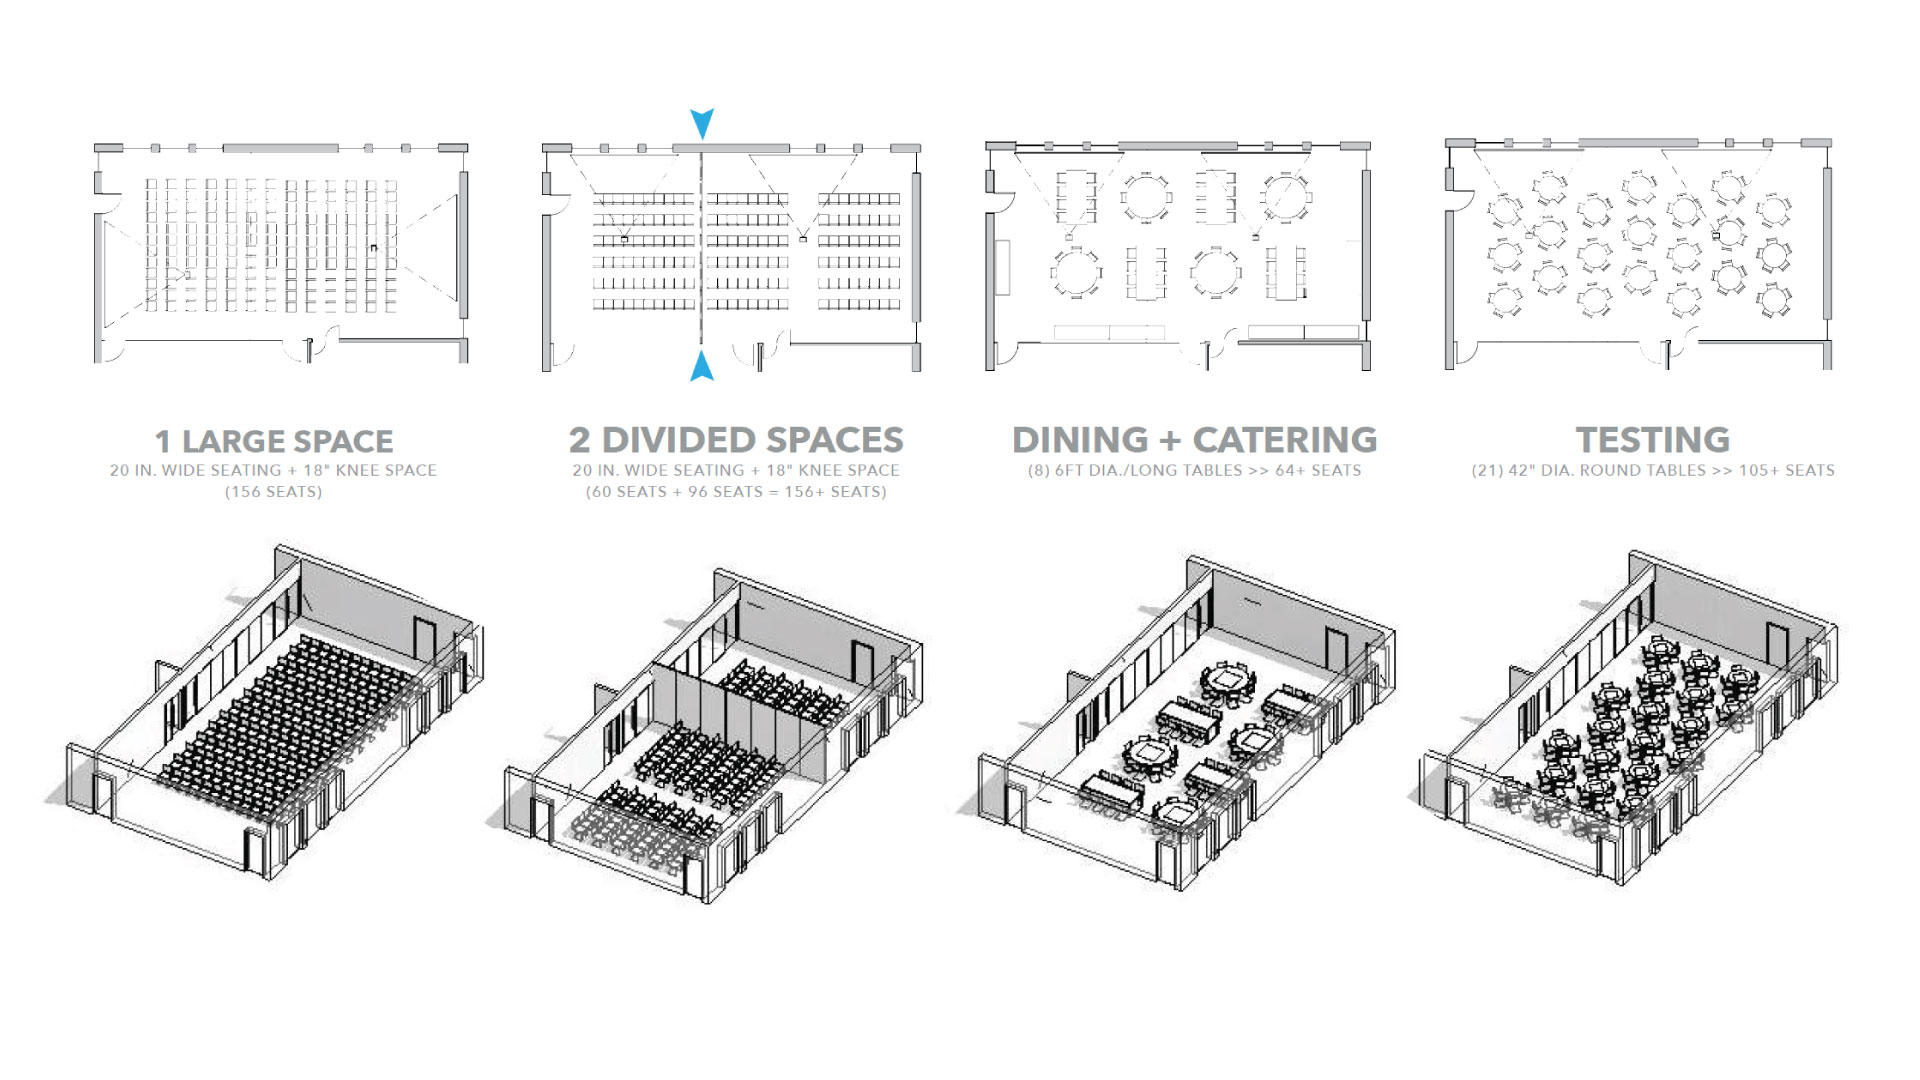 Large room depicted in 4 different layout options:1 a large open space, 2 a divided space, 3 a dining and catering area, 4 a testing area